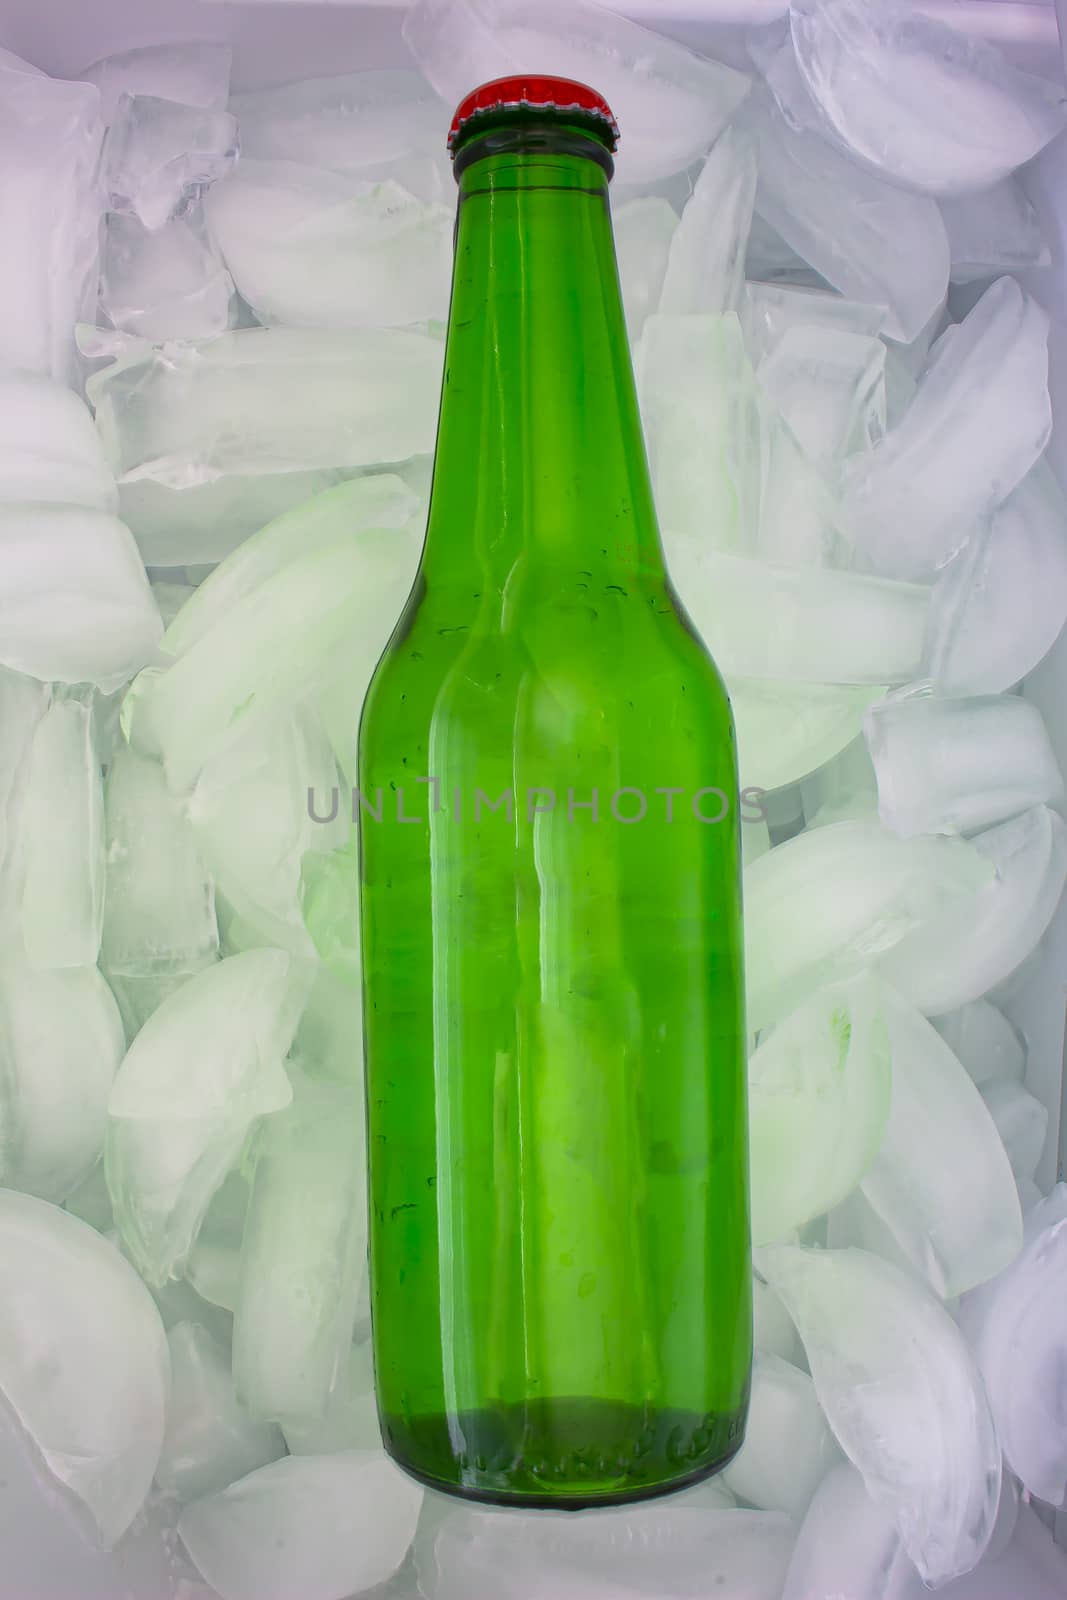 A generic green beer bottle on ice by oasisamuel